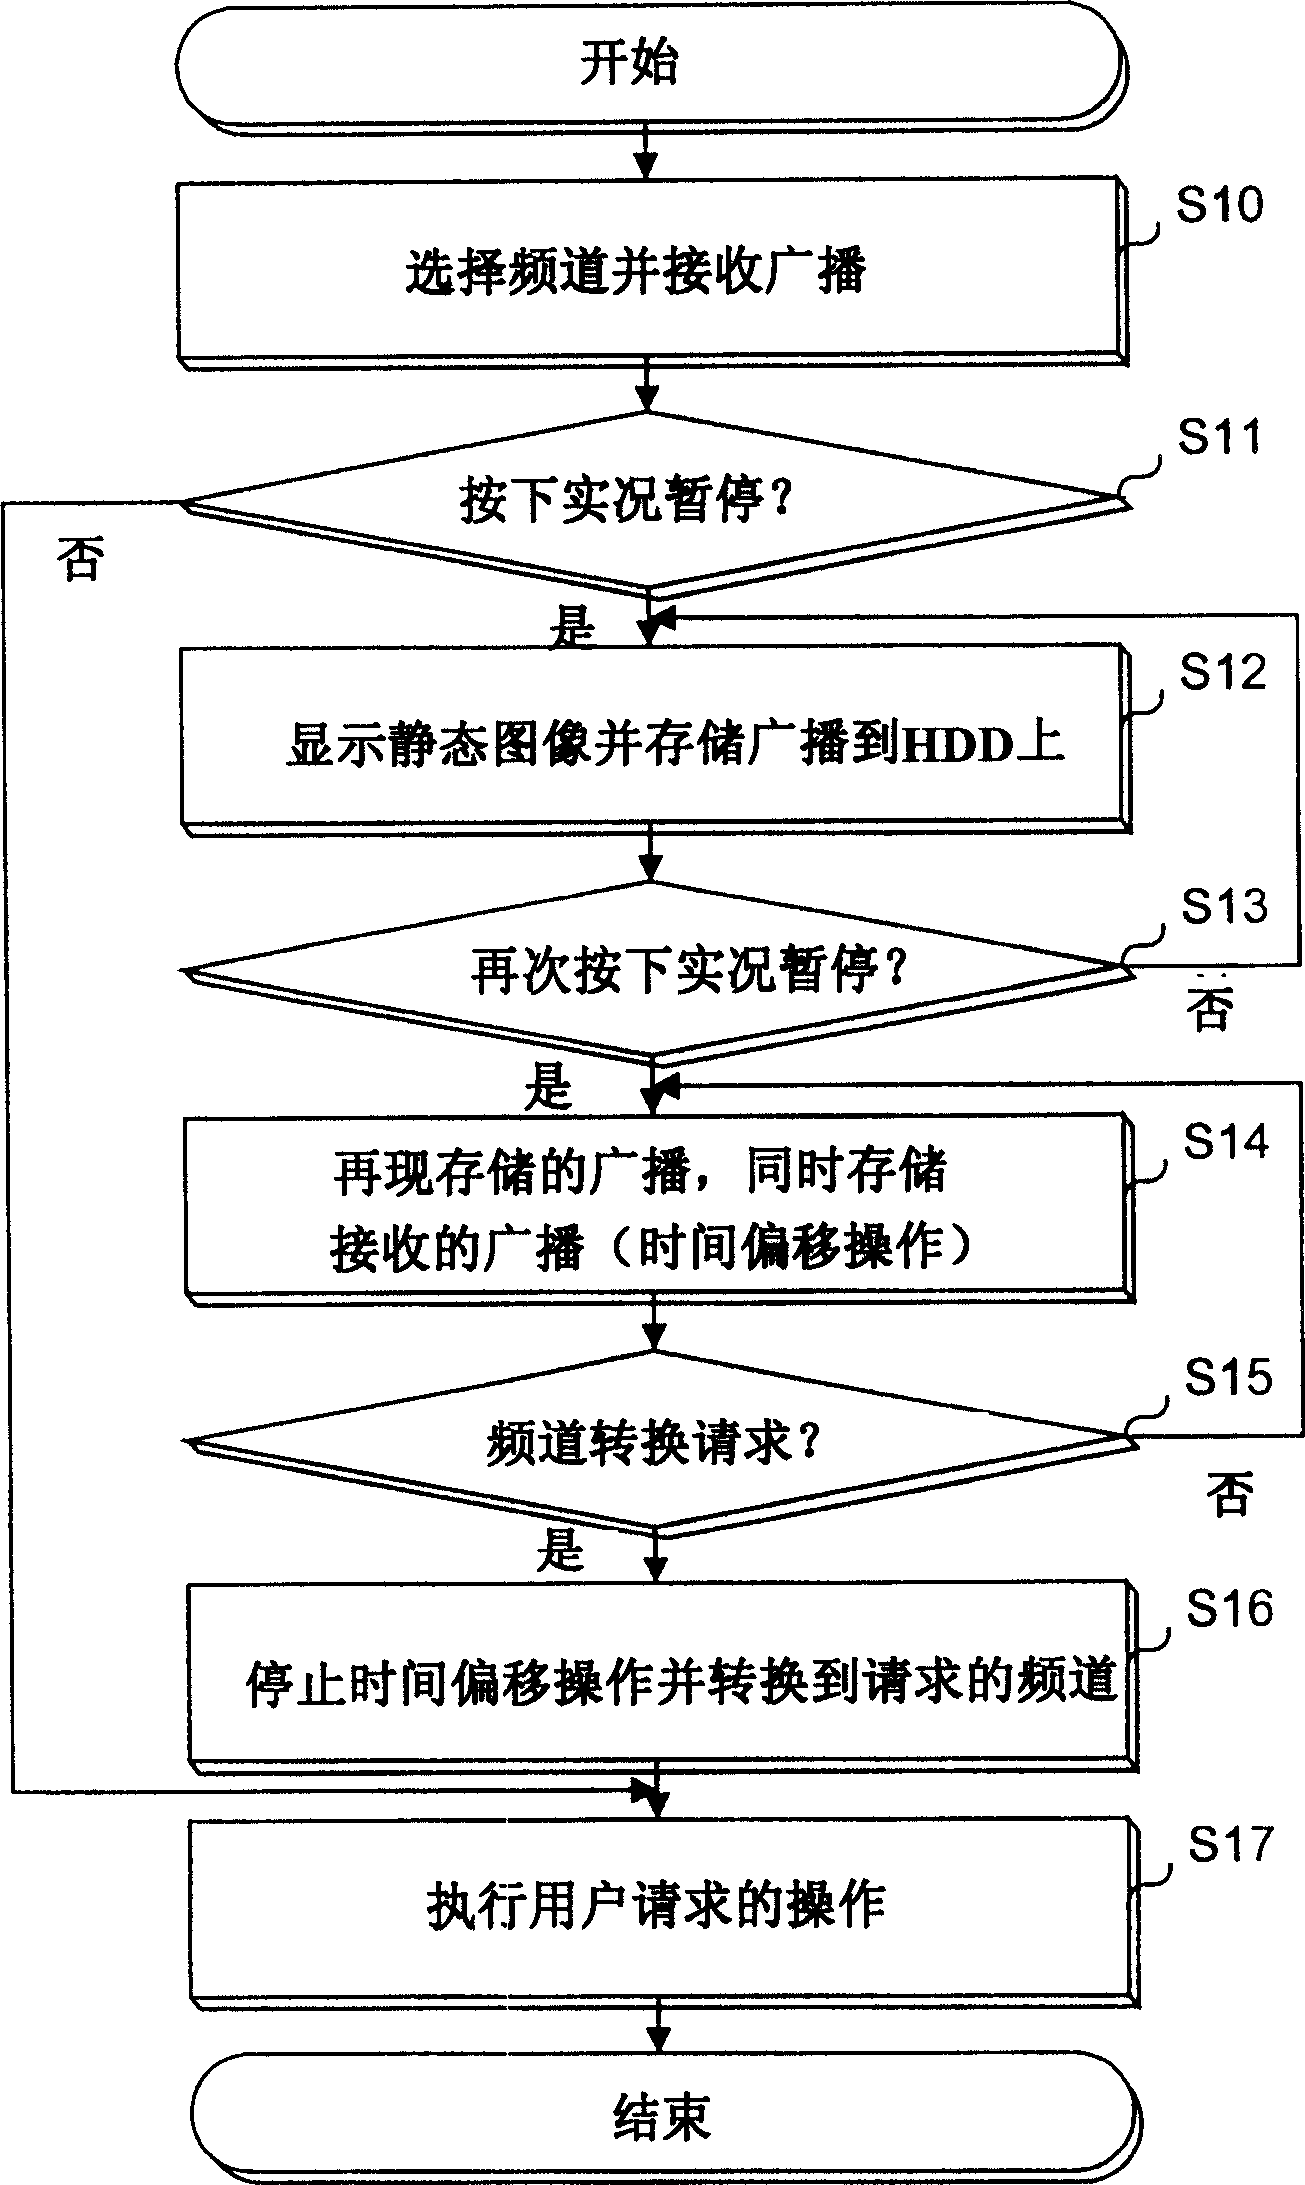 Channel switching method in broadcast recorder